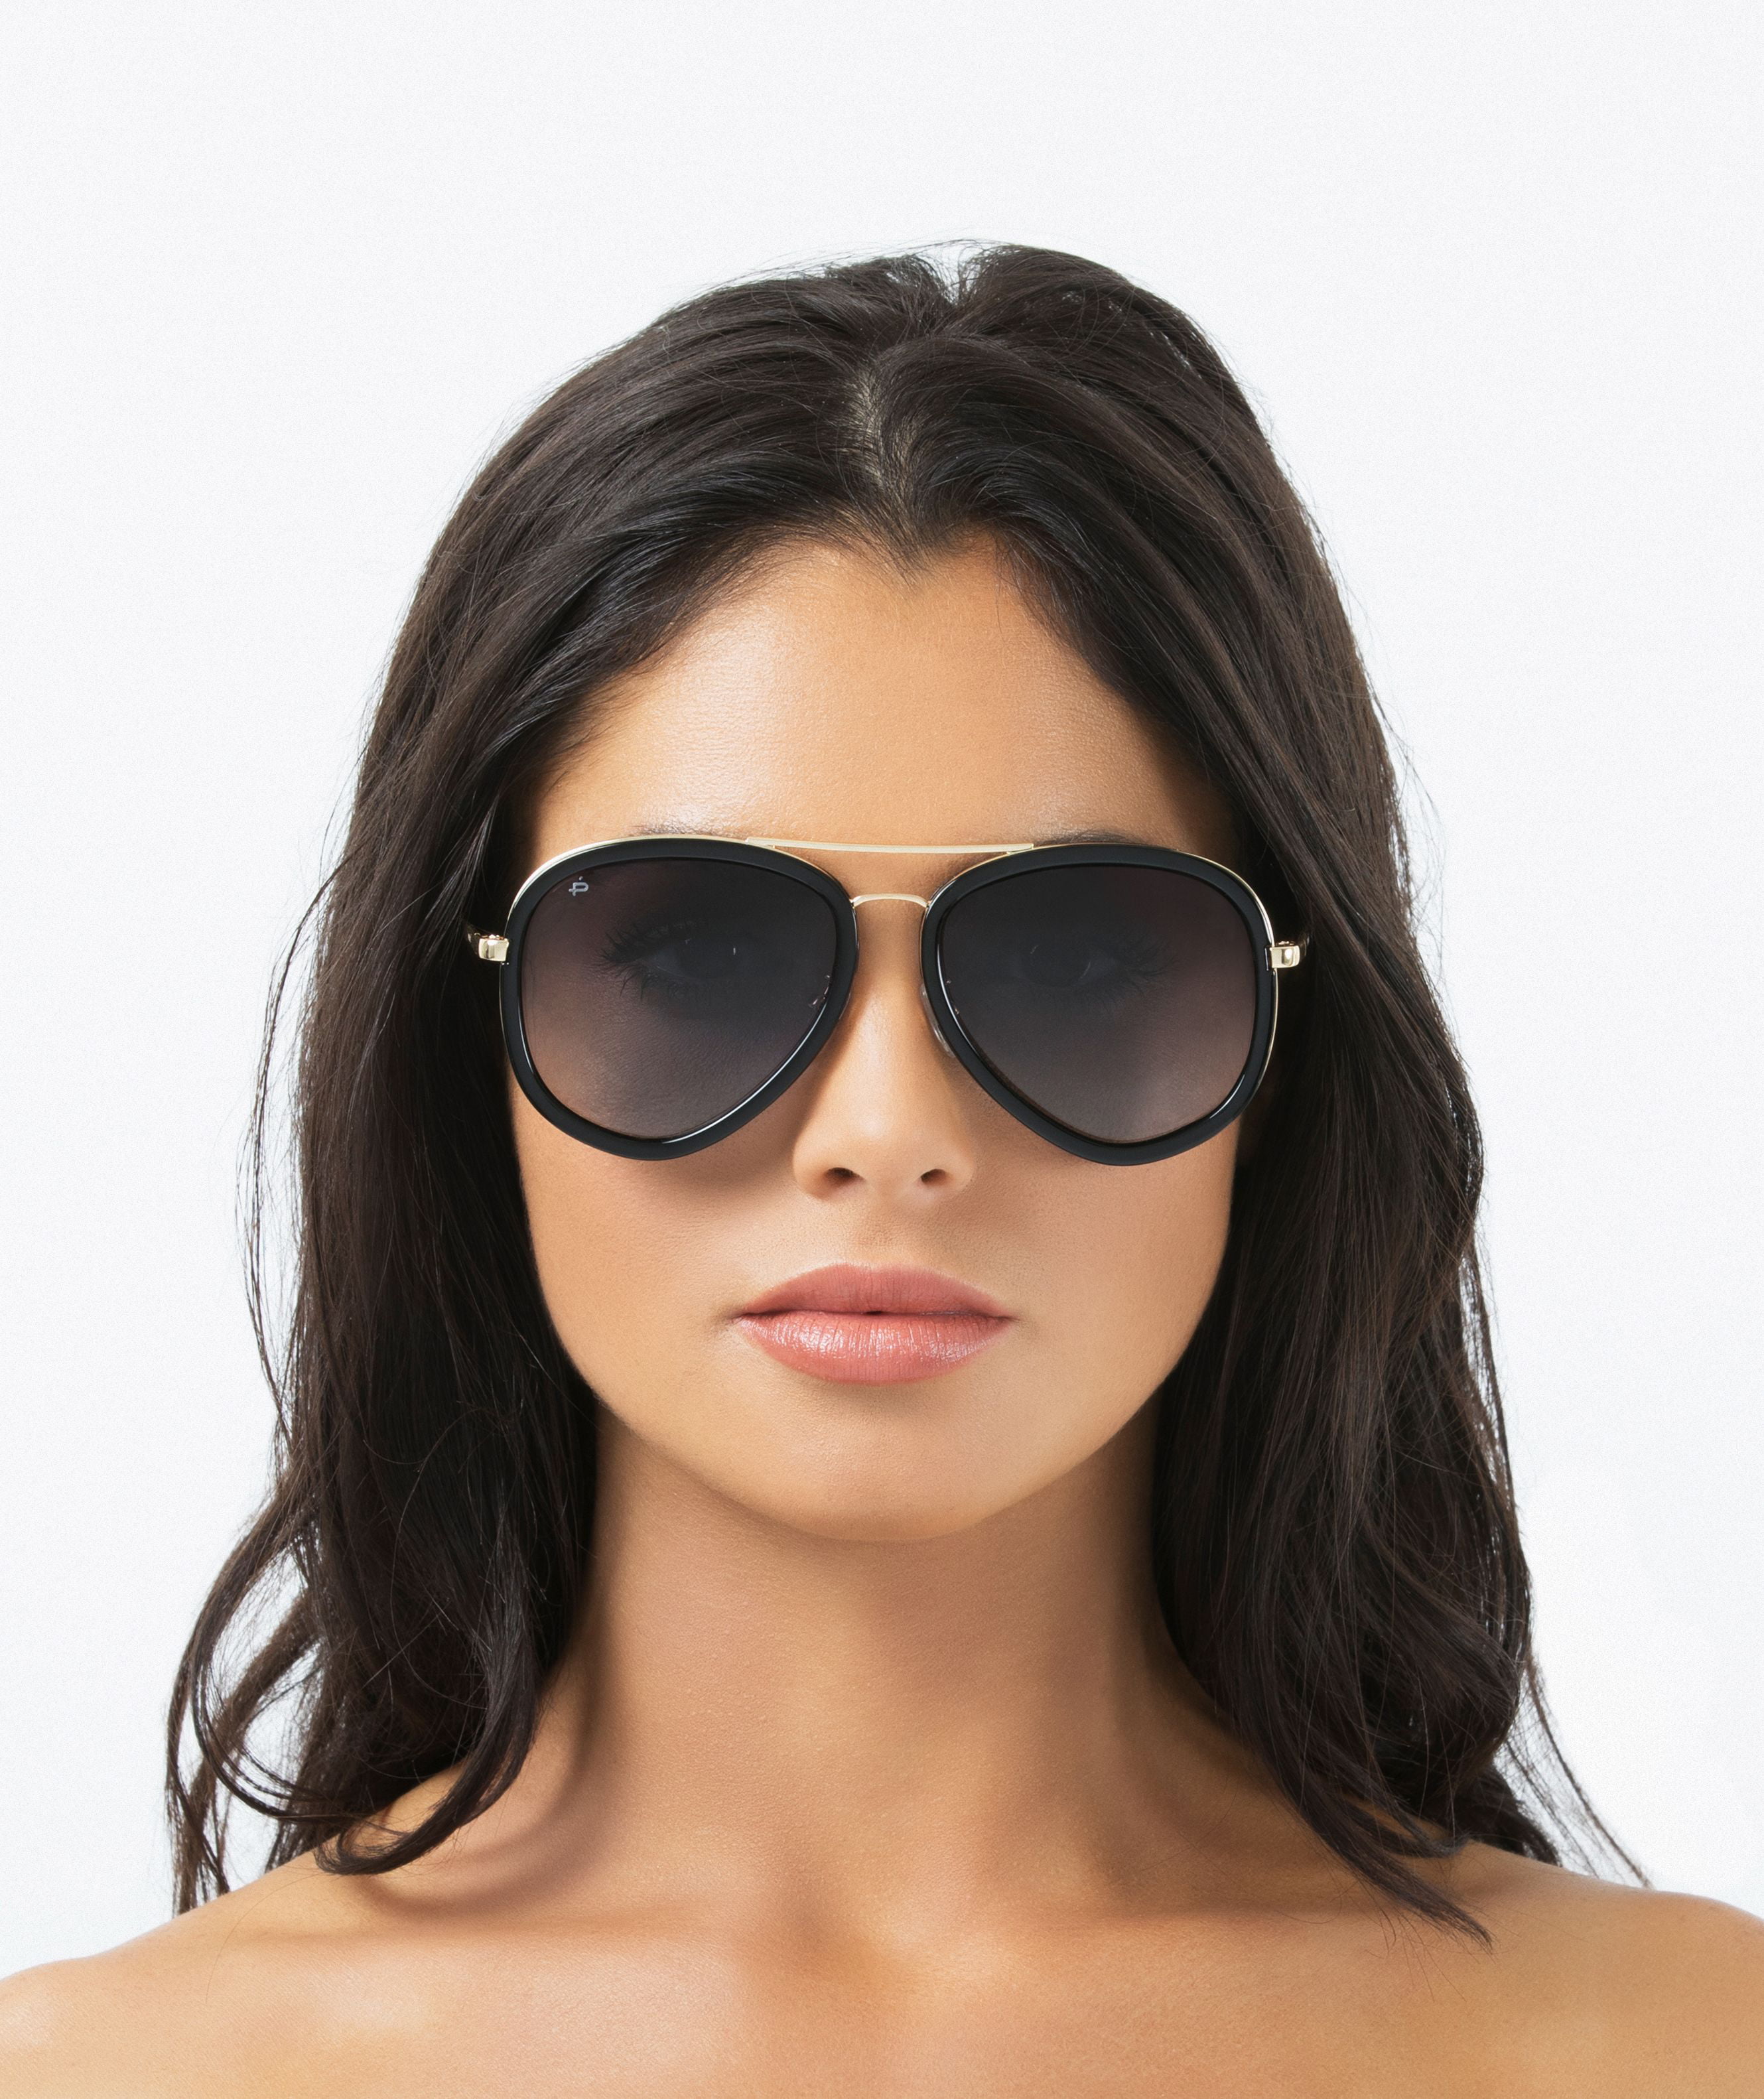 Privé Revaux Eyewear Completes Transaction With TSG Consumer Partners